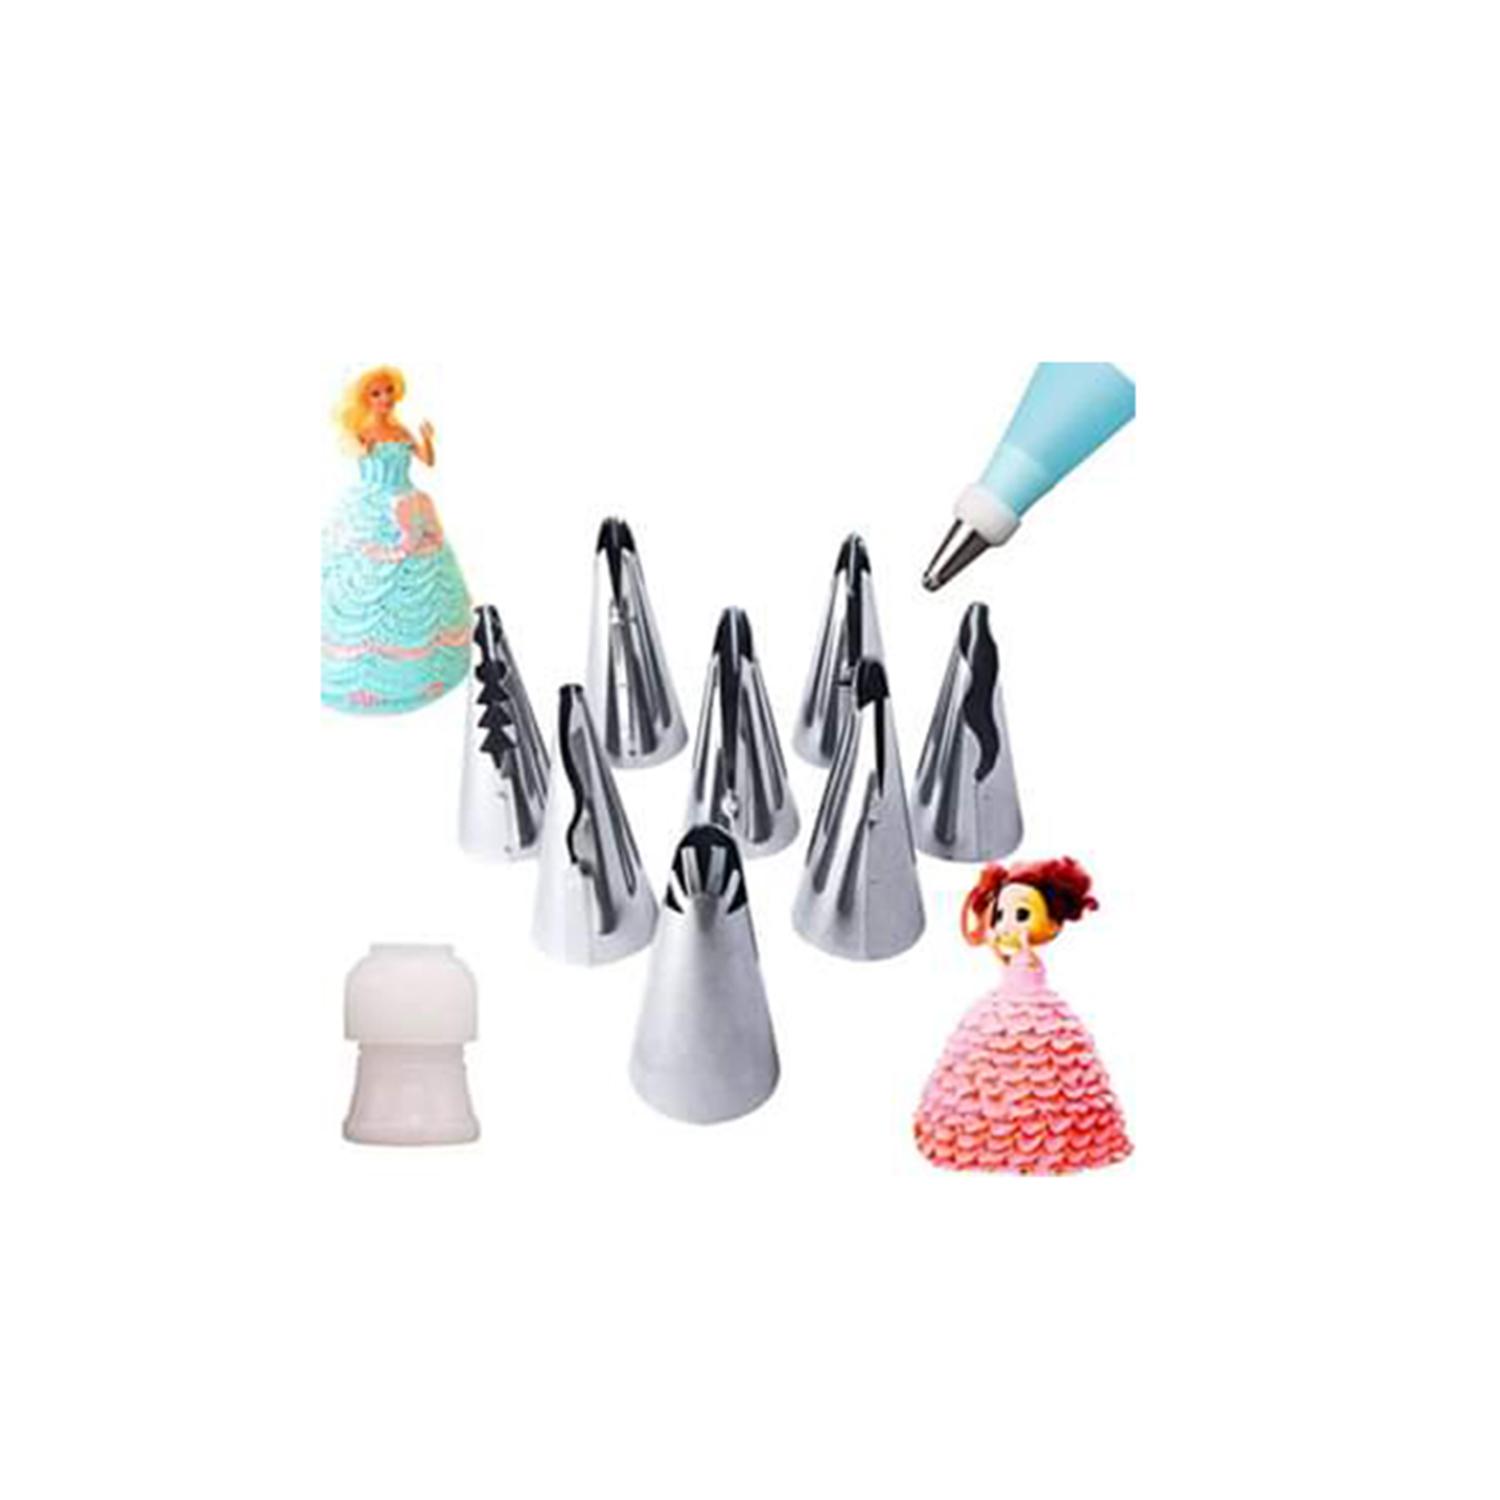 7PC BARBIE DOLL NOZZLE SET WITH PIPING BAG